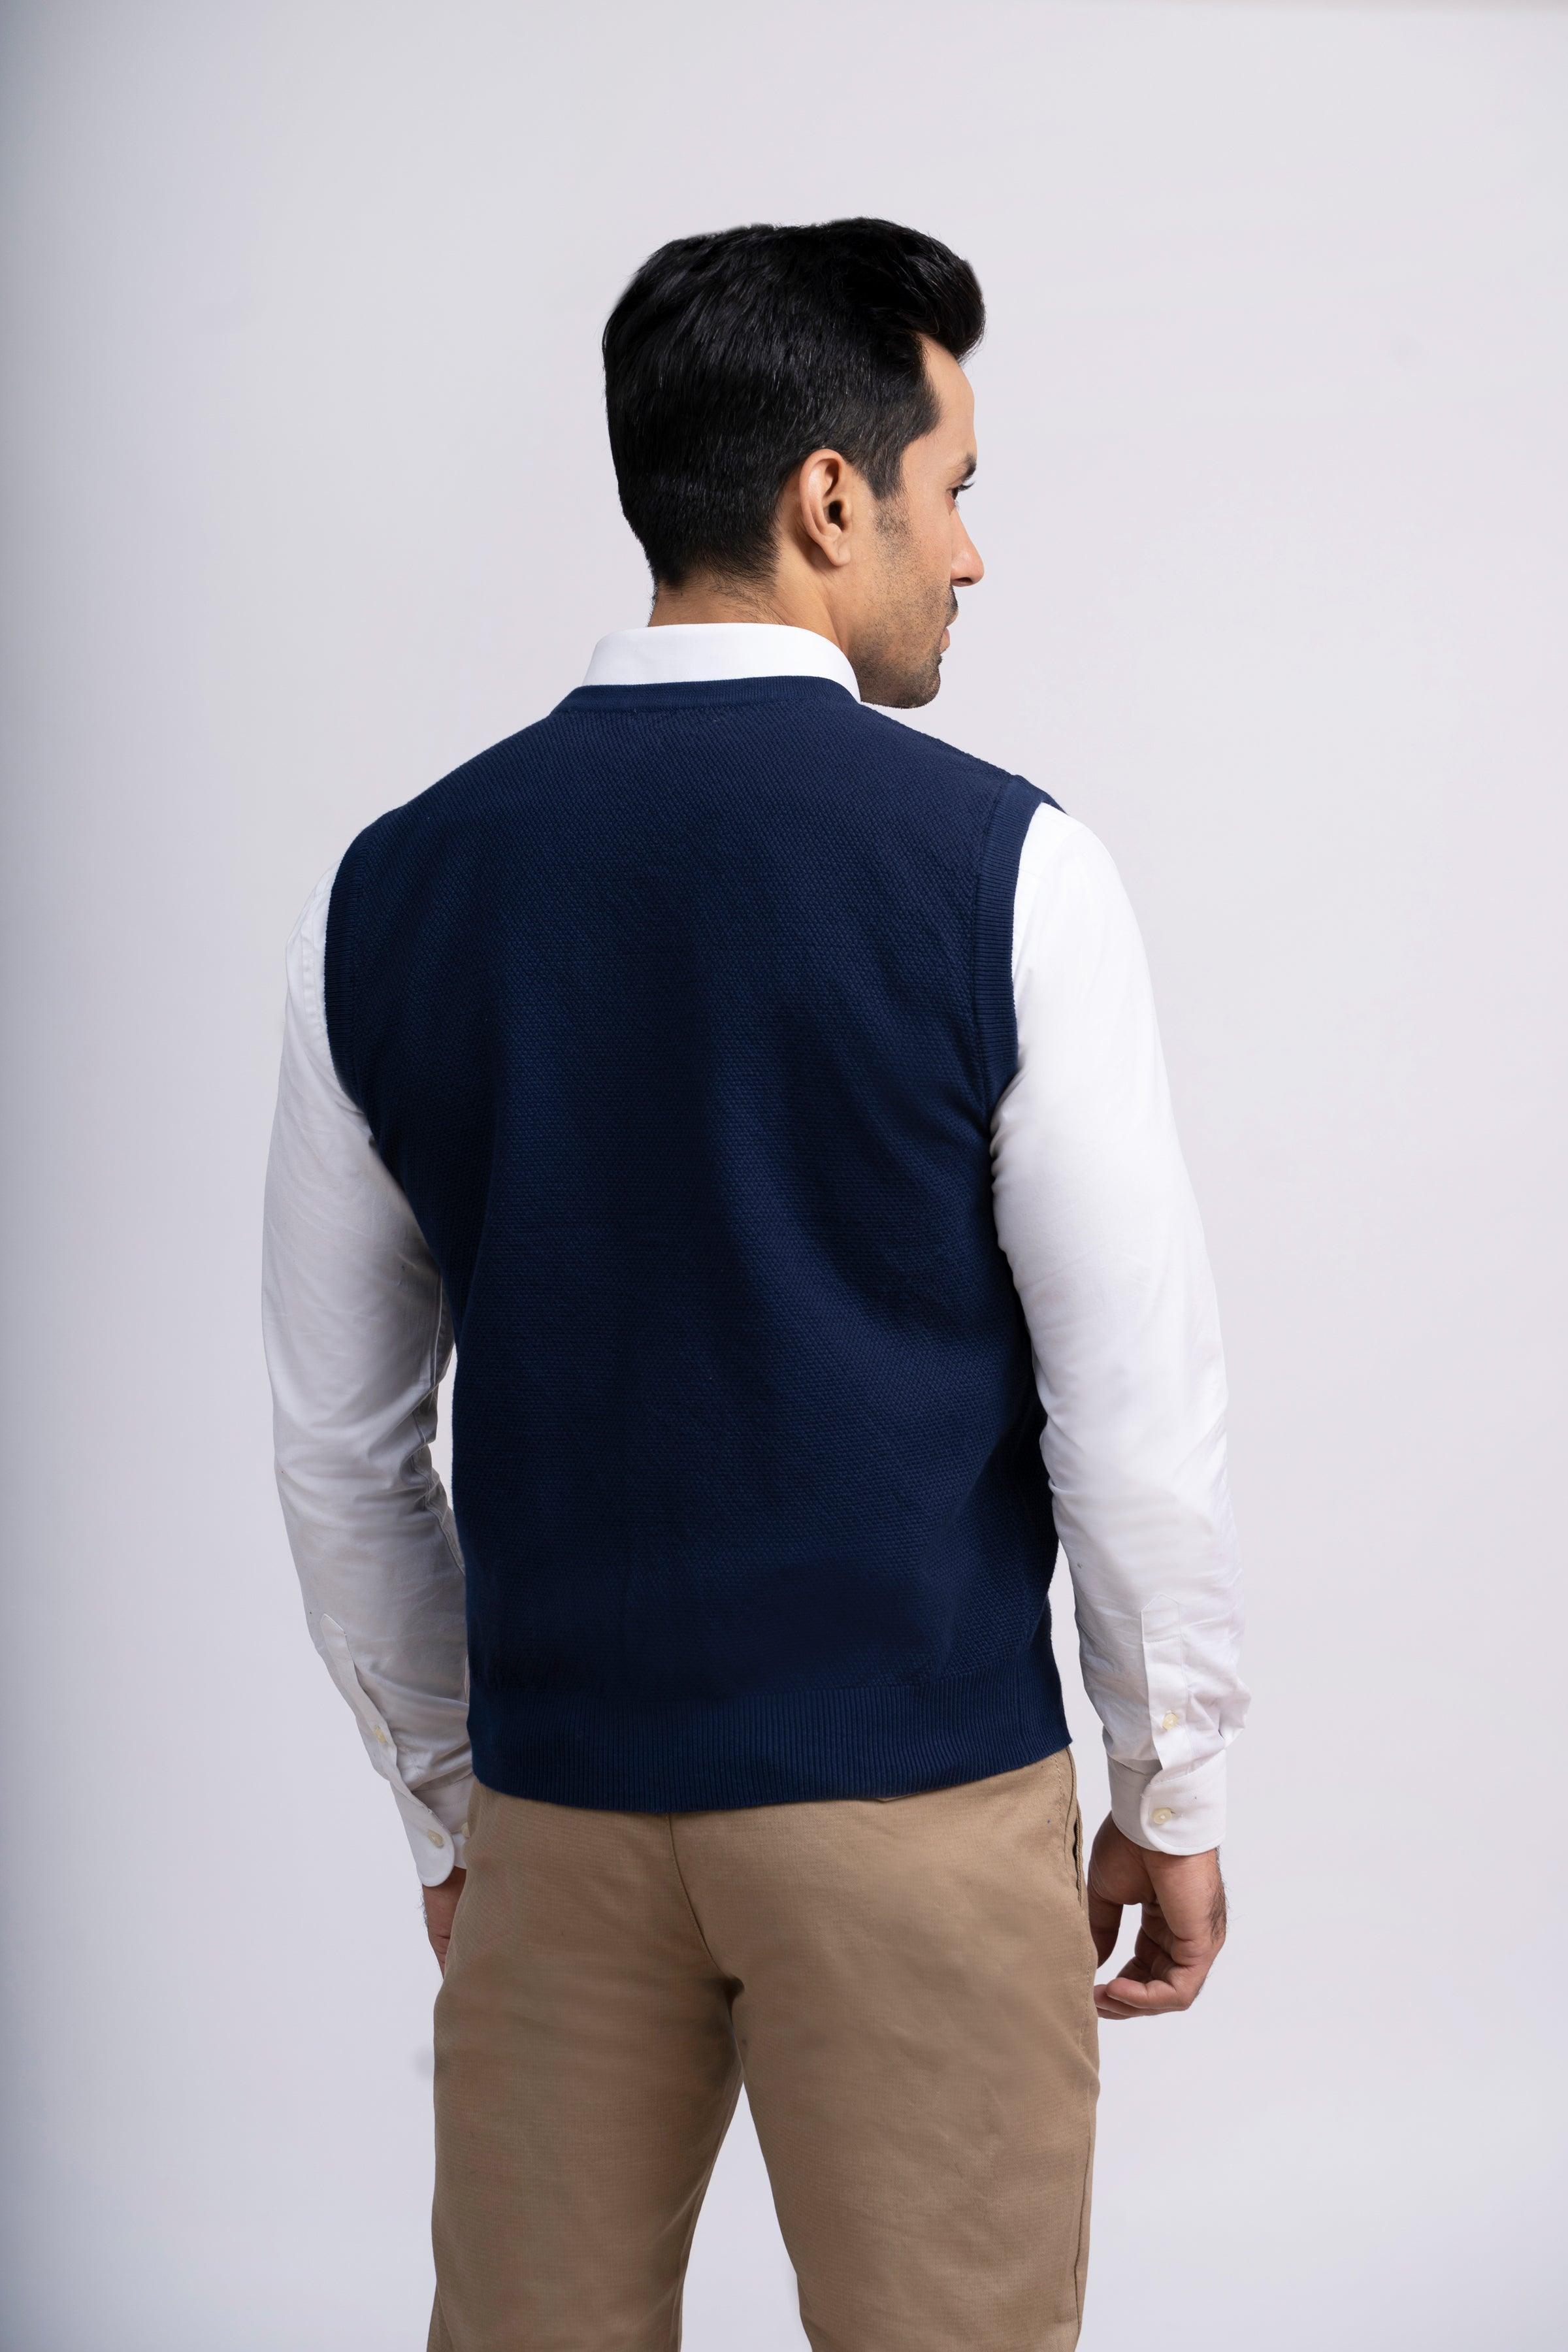 CARDIGAN SWEATER S/L NAVY at Charcoal Clothing